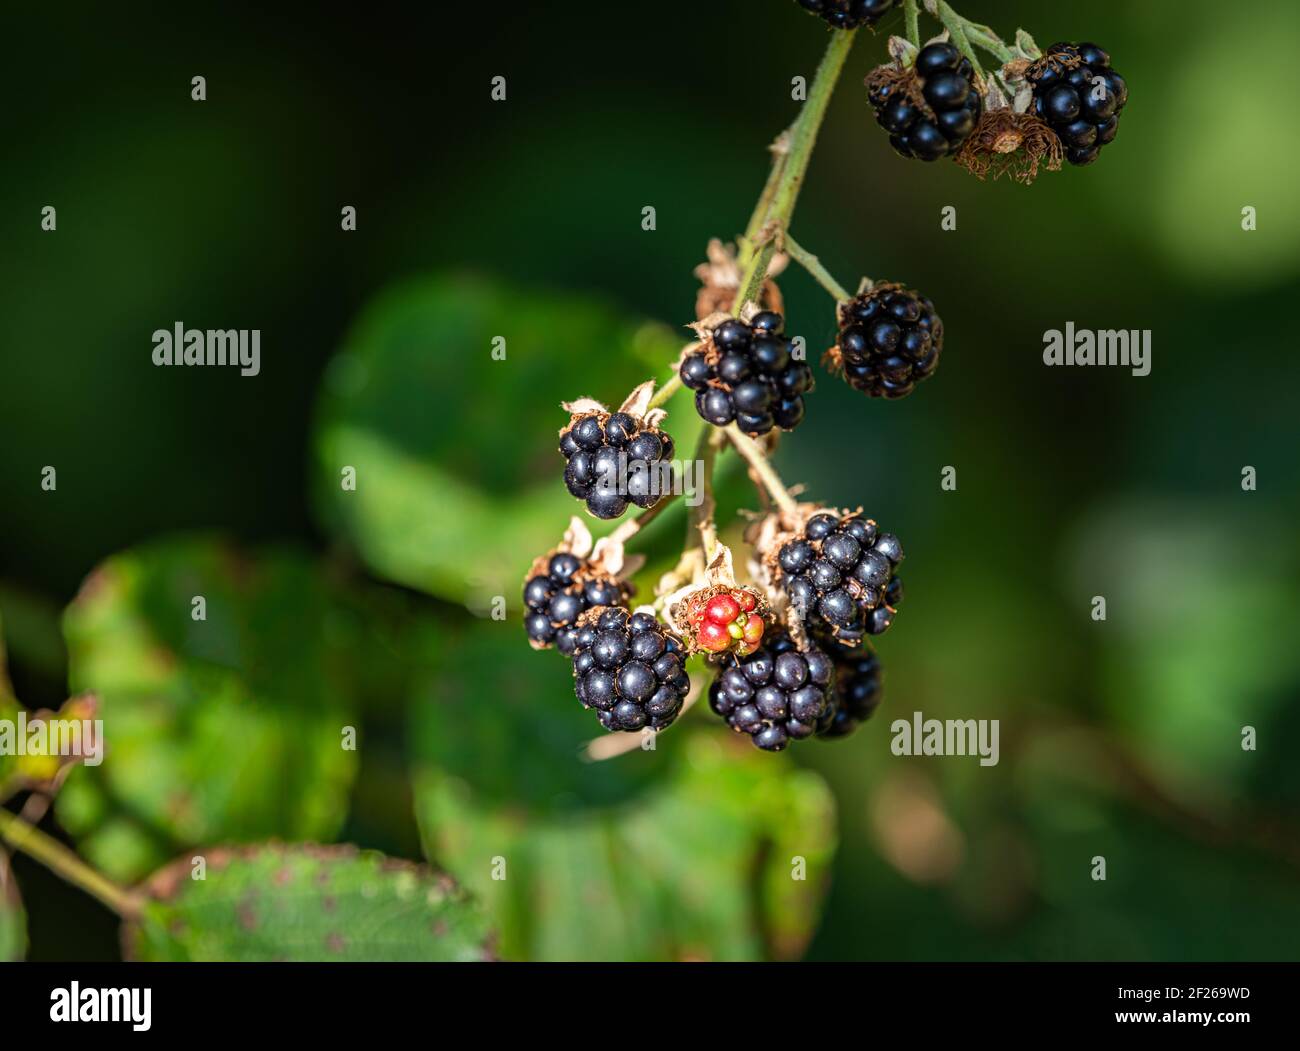 Ripe Blackberries with blurred background Stock Photo